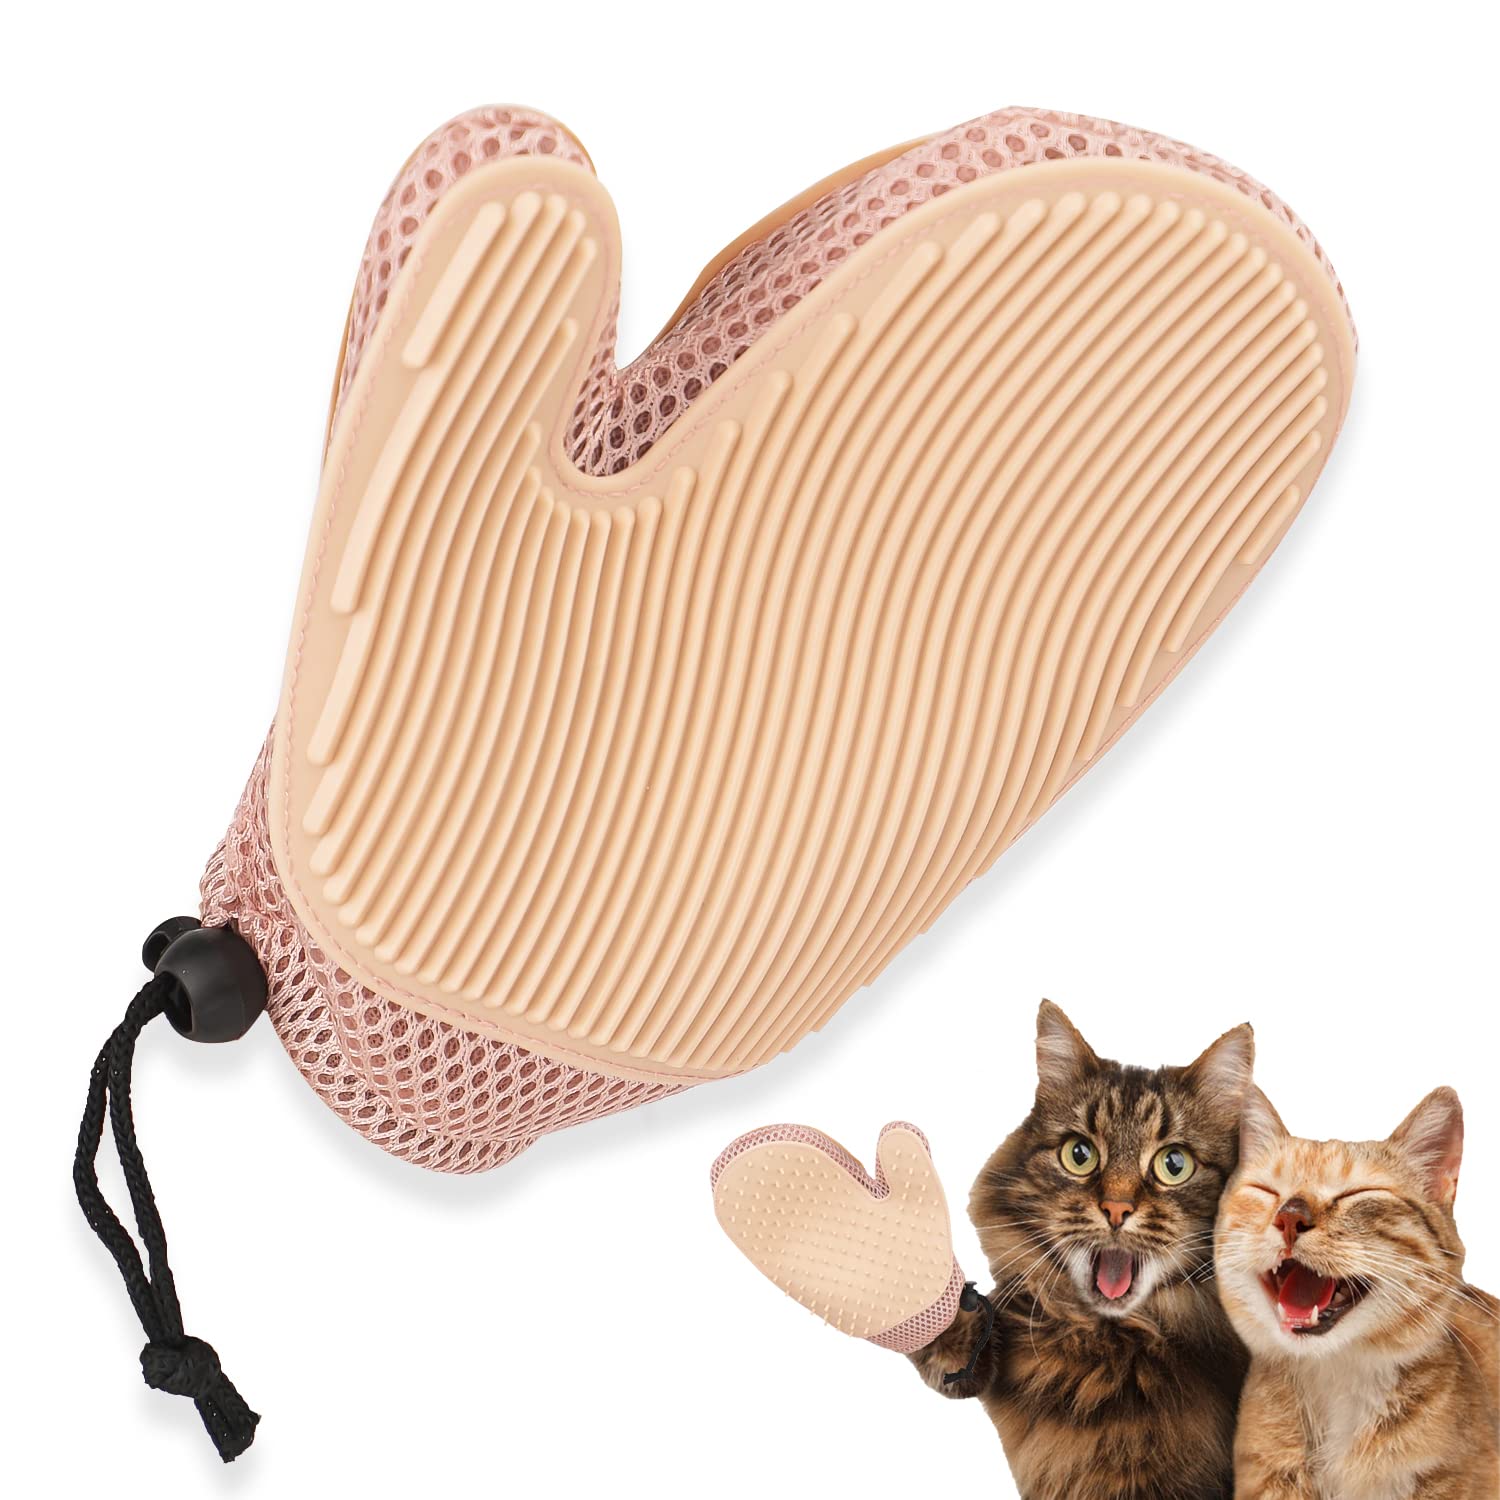 ❤️Mother's Day SALE🎉2 in 1 Pet Fur Remover Glove